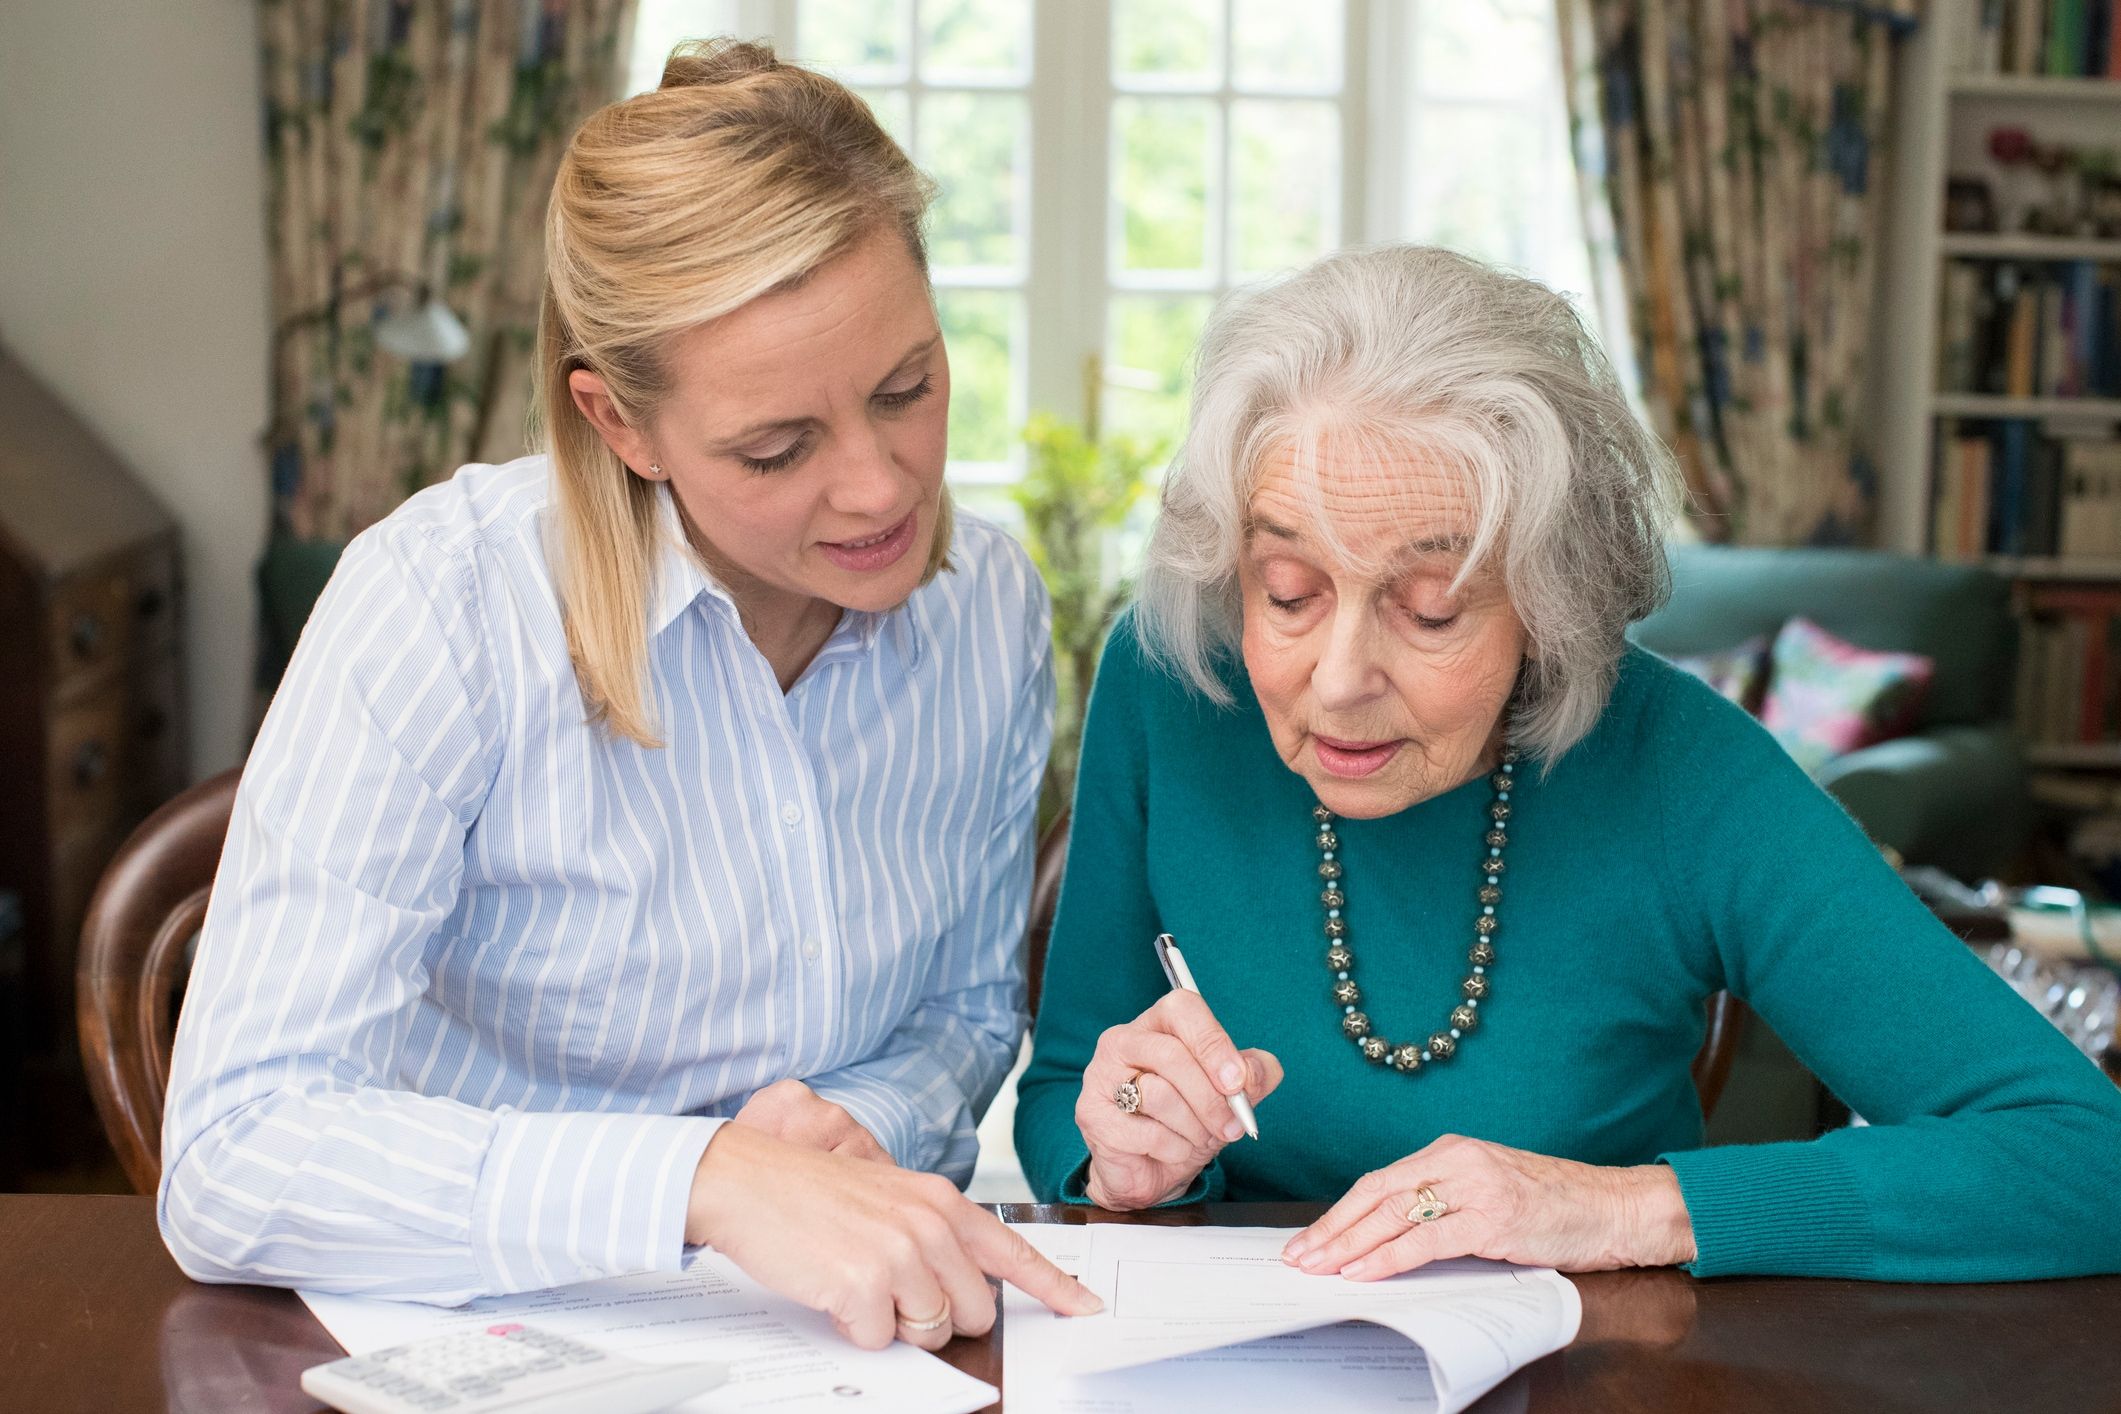 Watch out for these hidden costs of assisted living